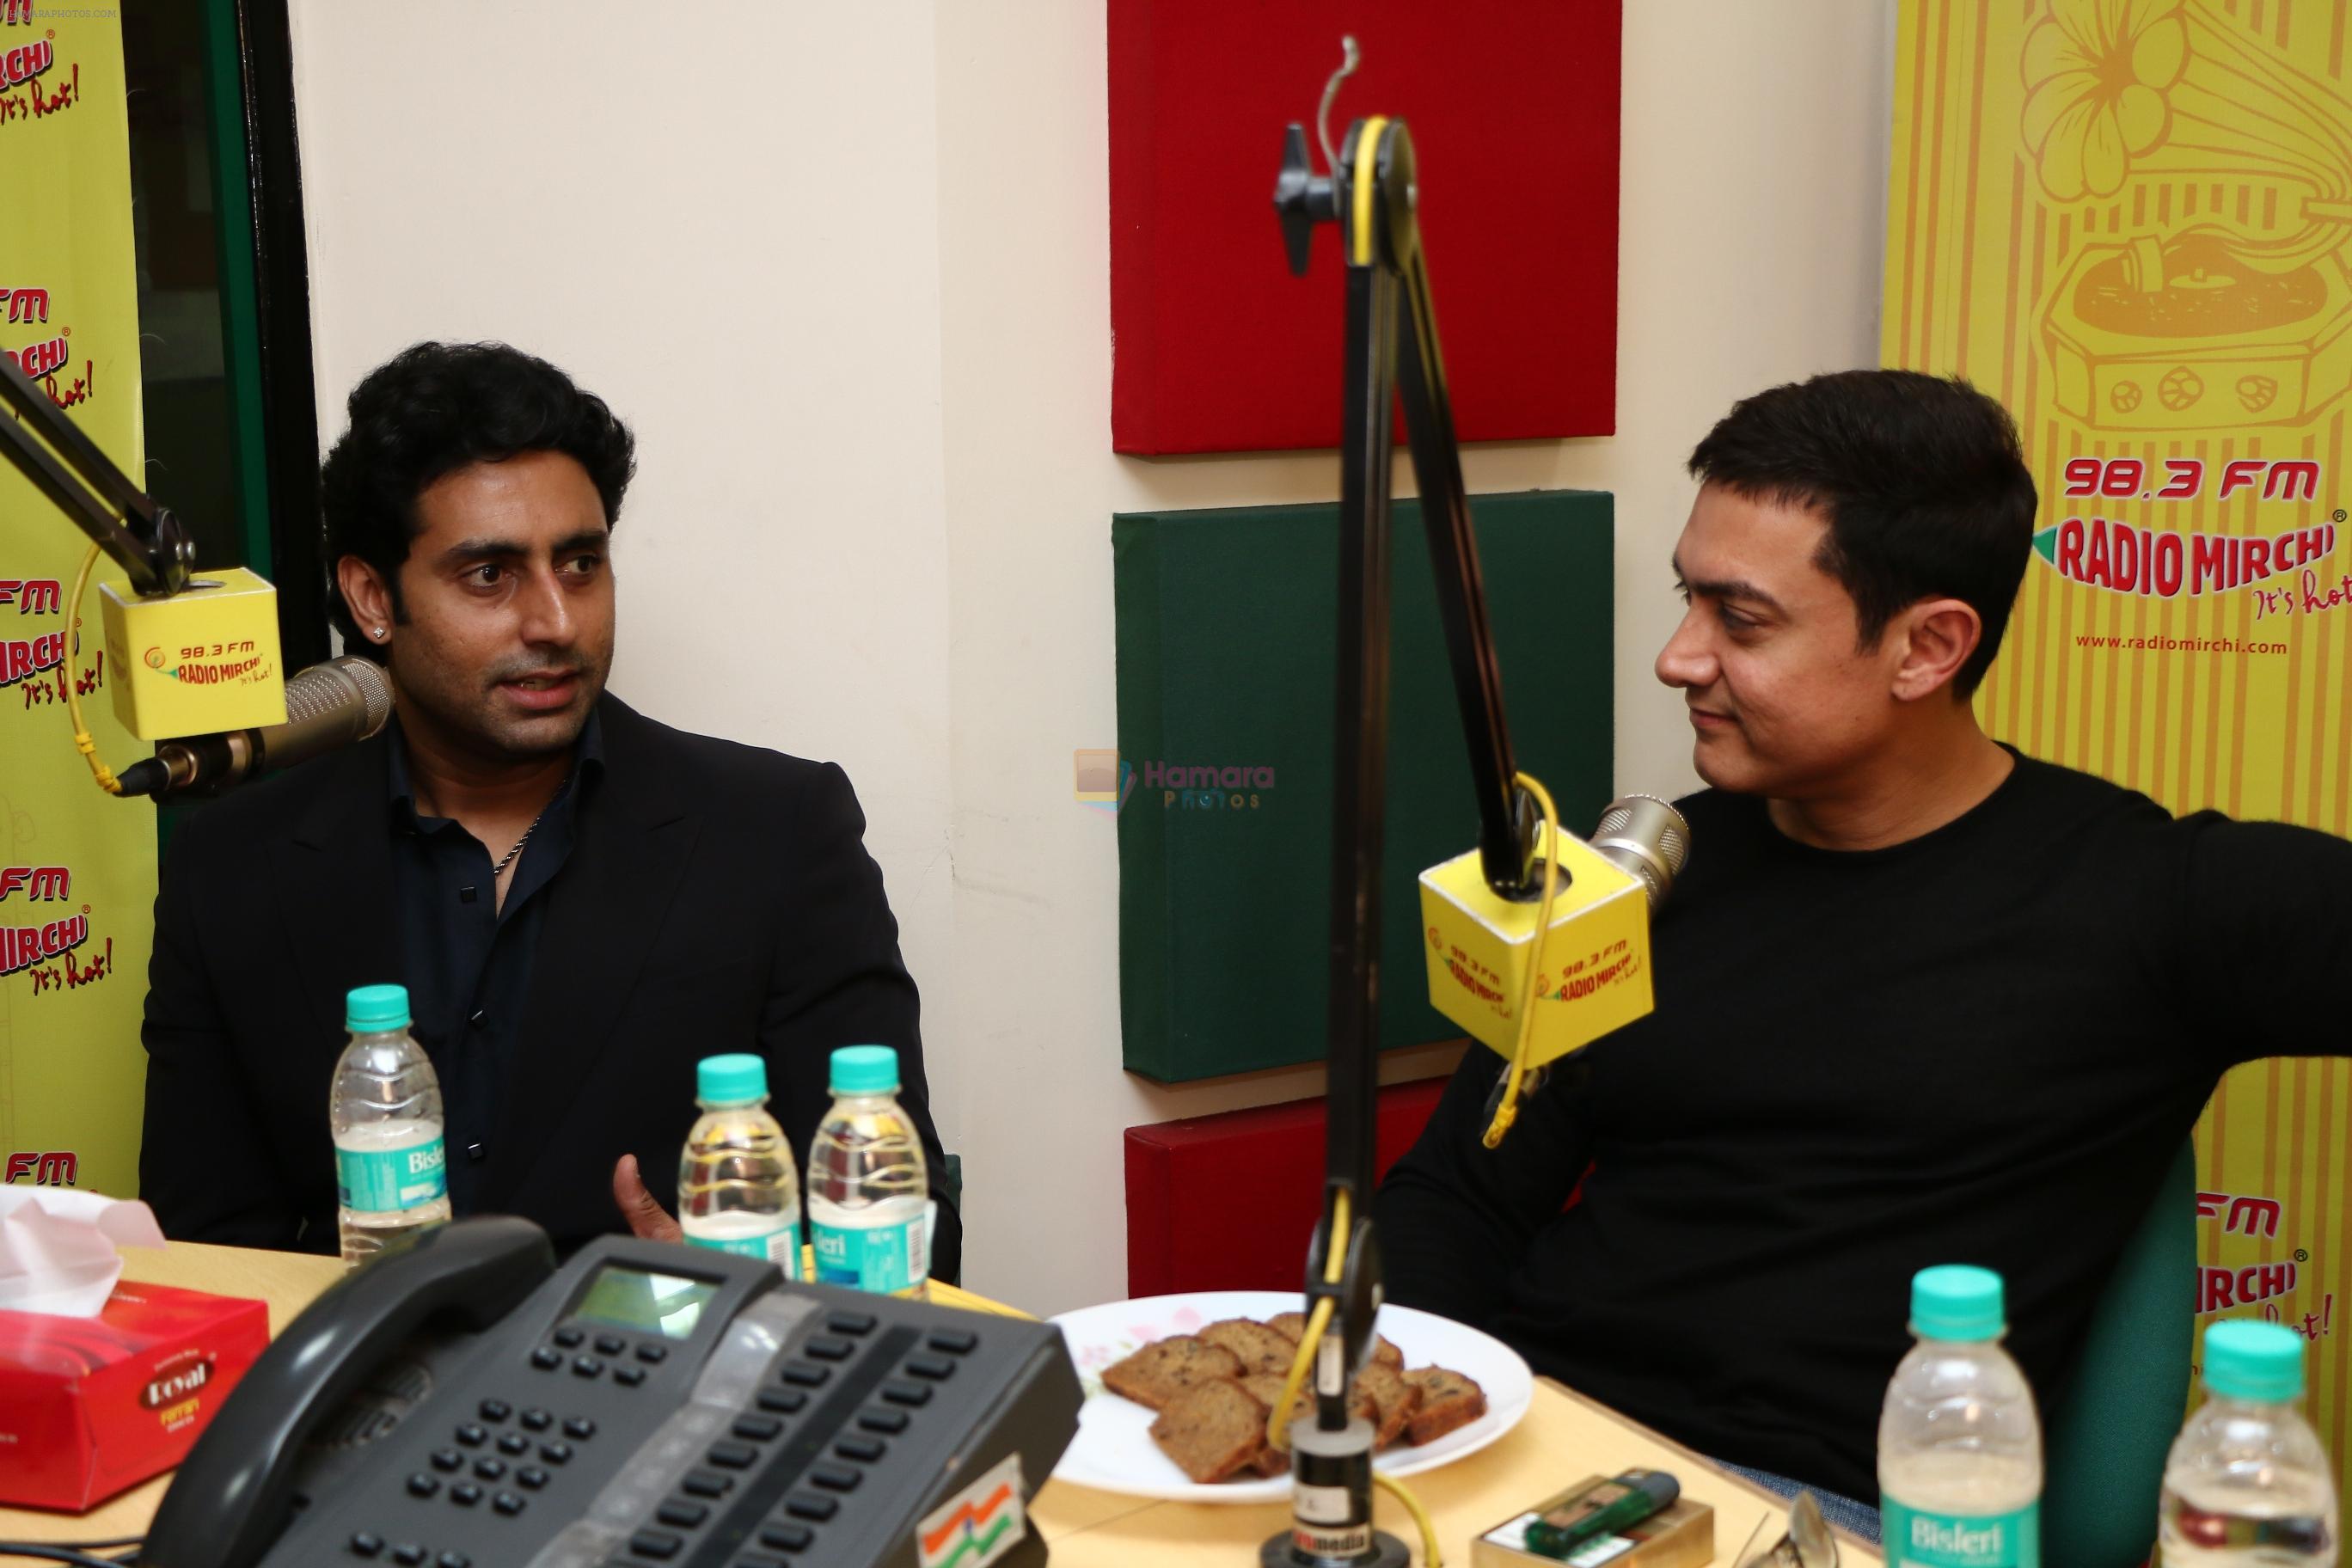 Abhishekh Bachchan and Aamir Khan at Radio Mirchi studio for promotion of their upcoming movie Dhoom 3